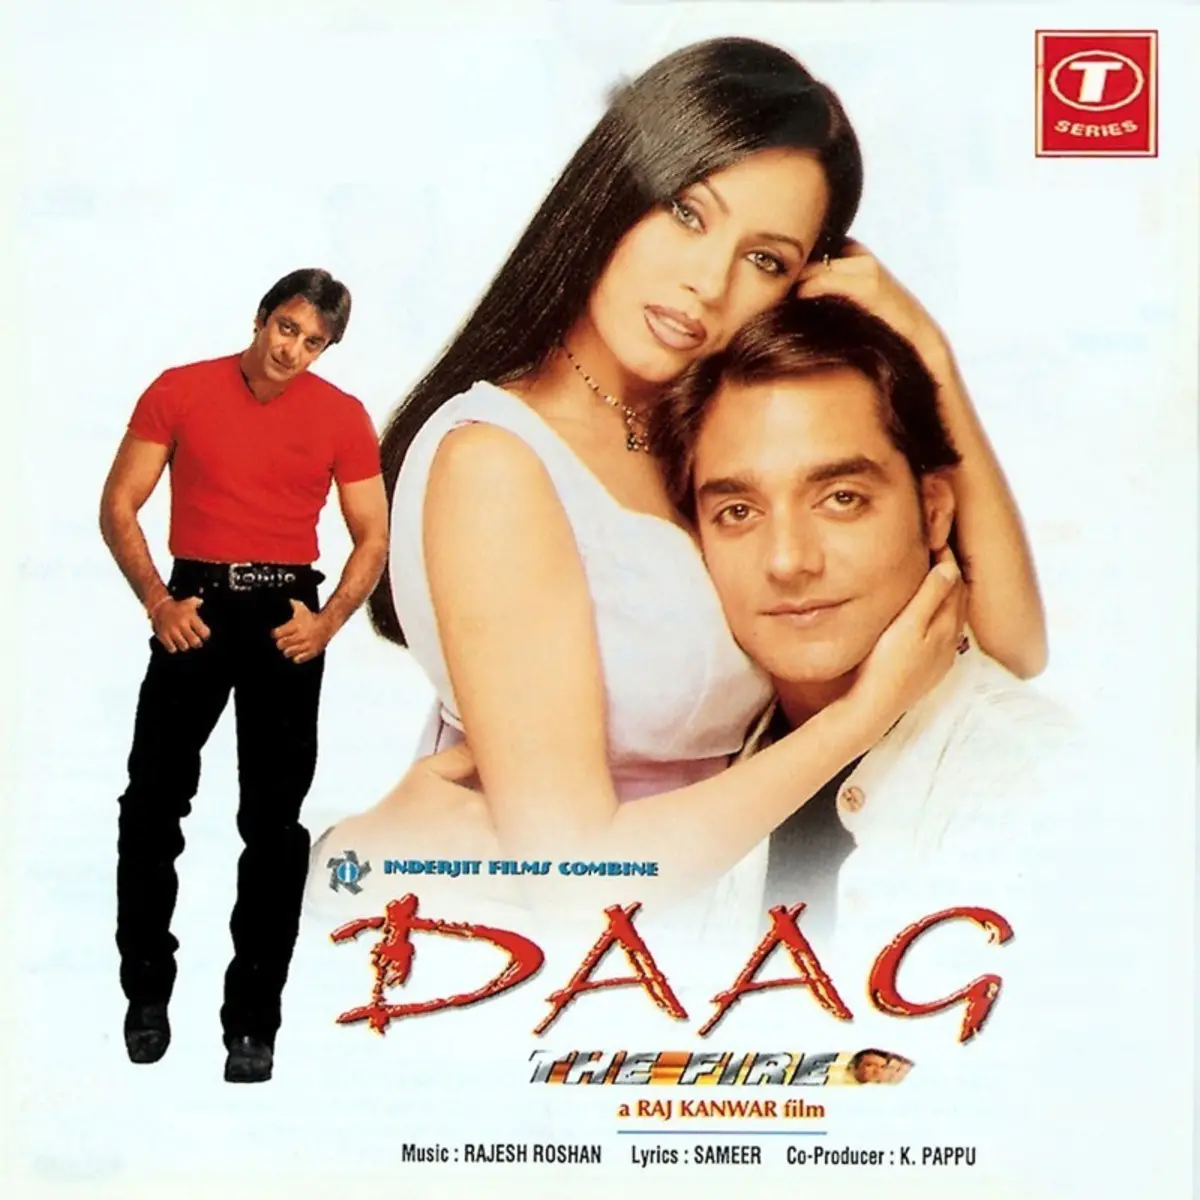 Daag The Fire Songs Download Daag The Fire Mp3 Songs Online Free On Gaana Com